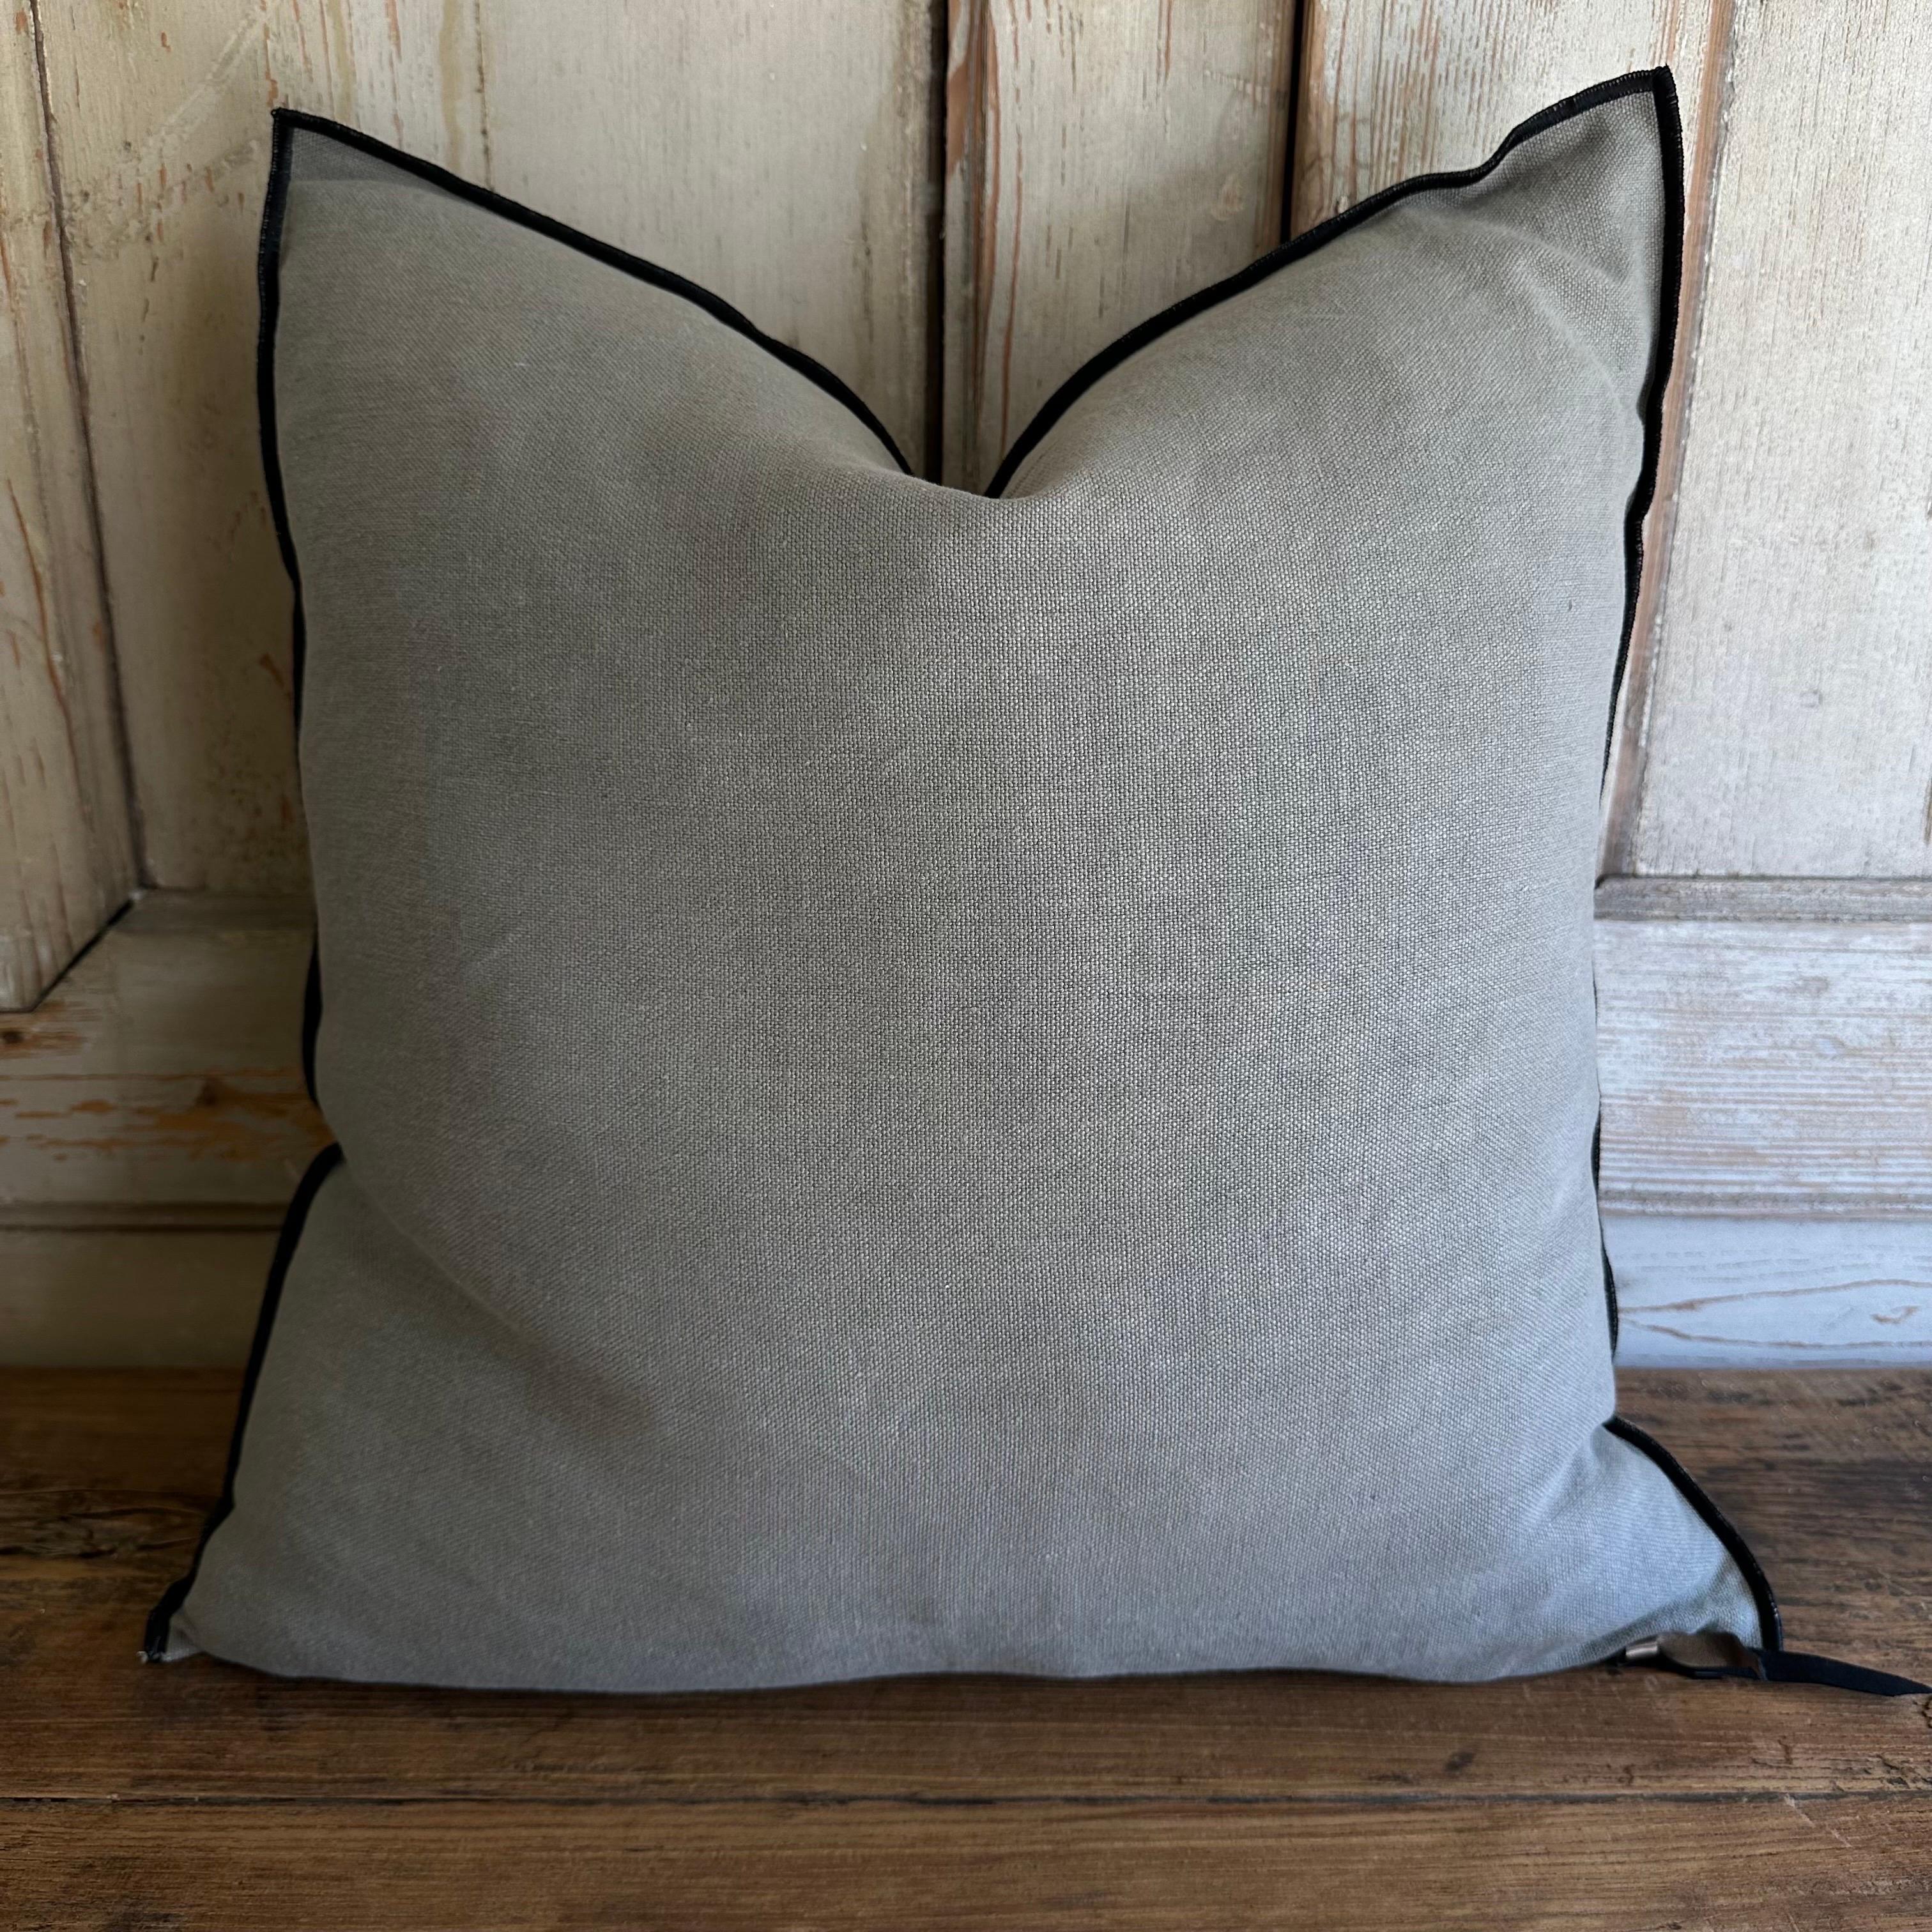 French stone washed linen accent pillow. 
Color : CAMO a deep muddy green with warm brown tones, this color reads a dark green gray, with a nubby textured style pillow with a stitched edge, metal zipper closure. 
Size: 22